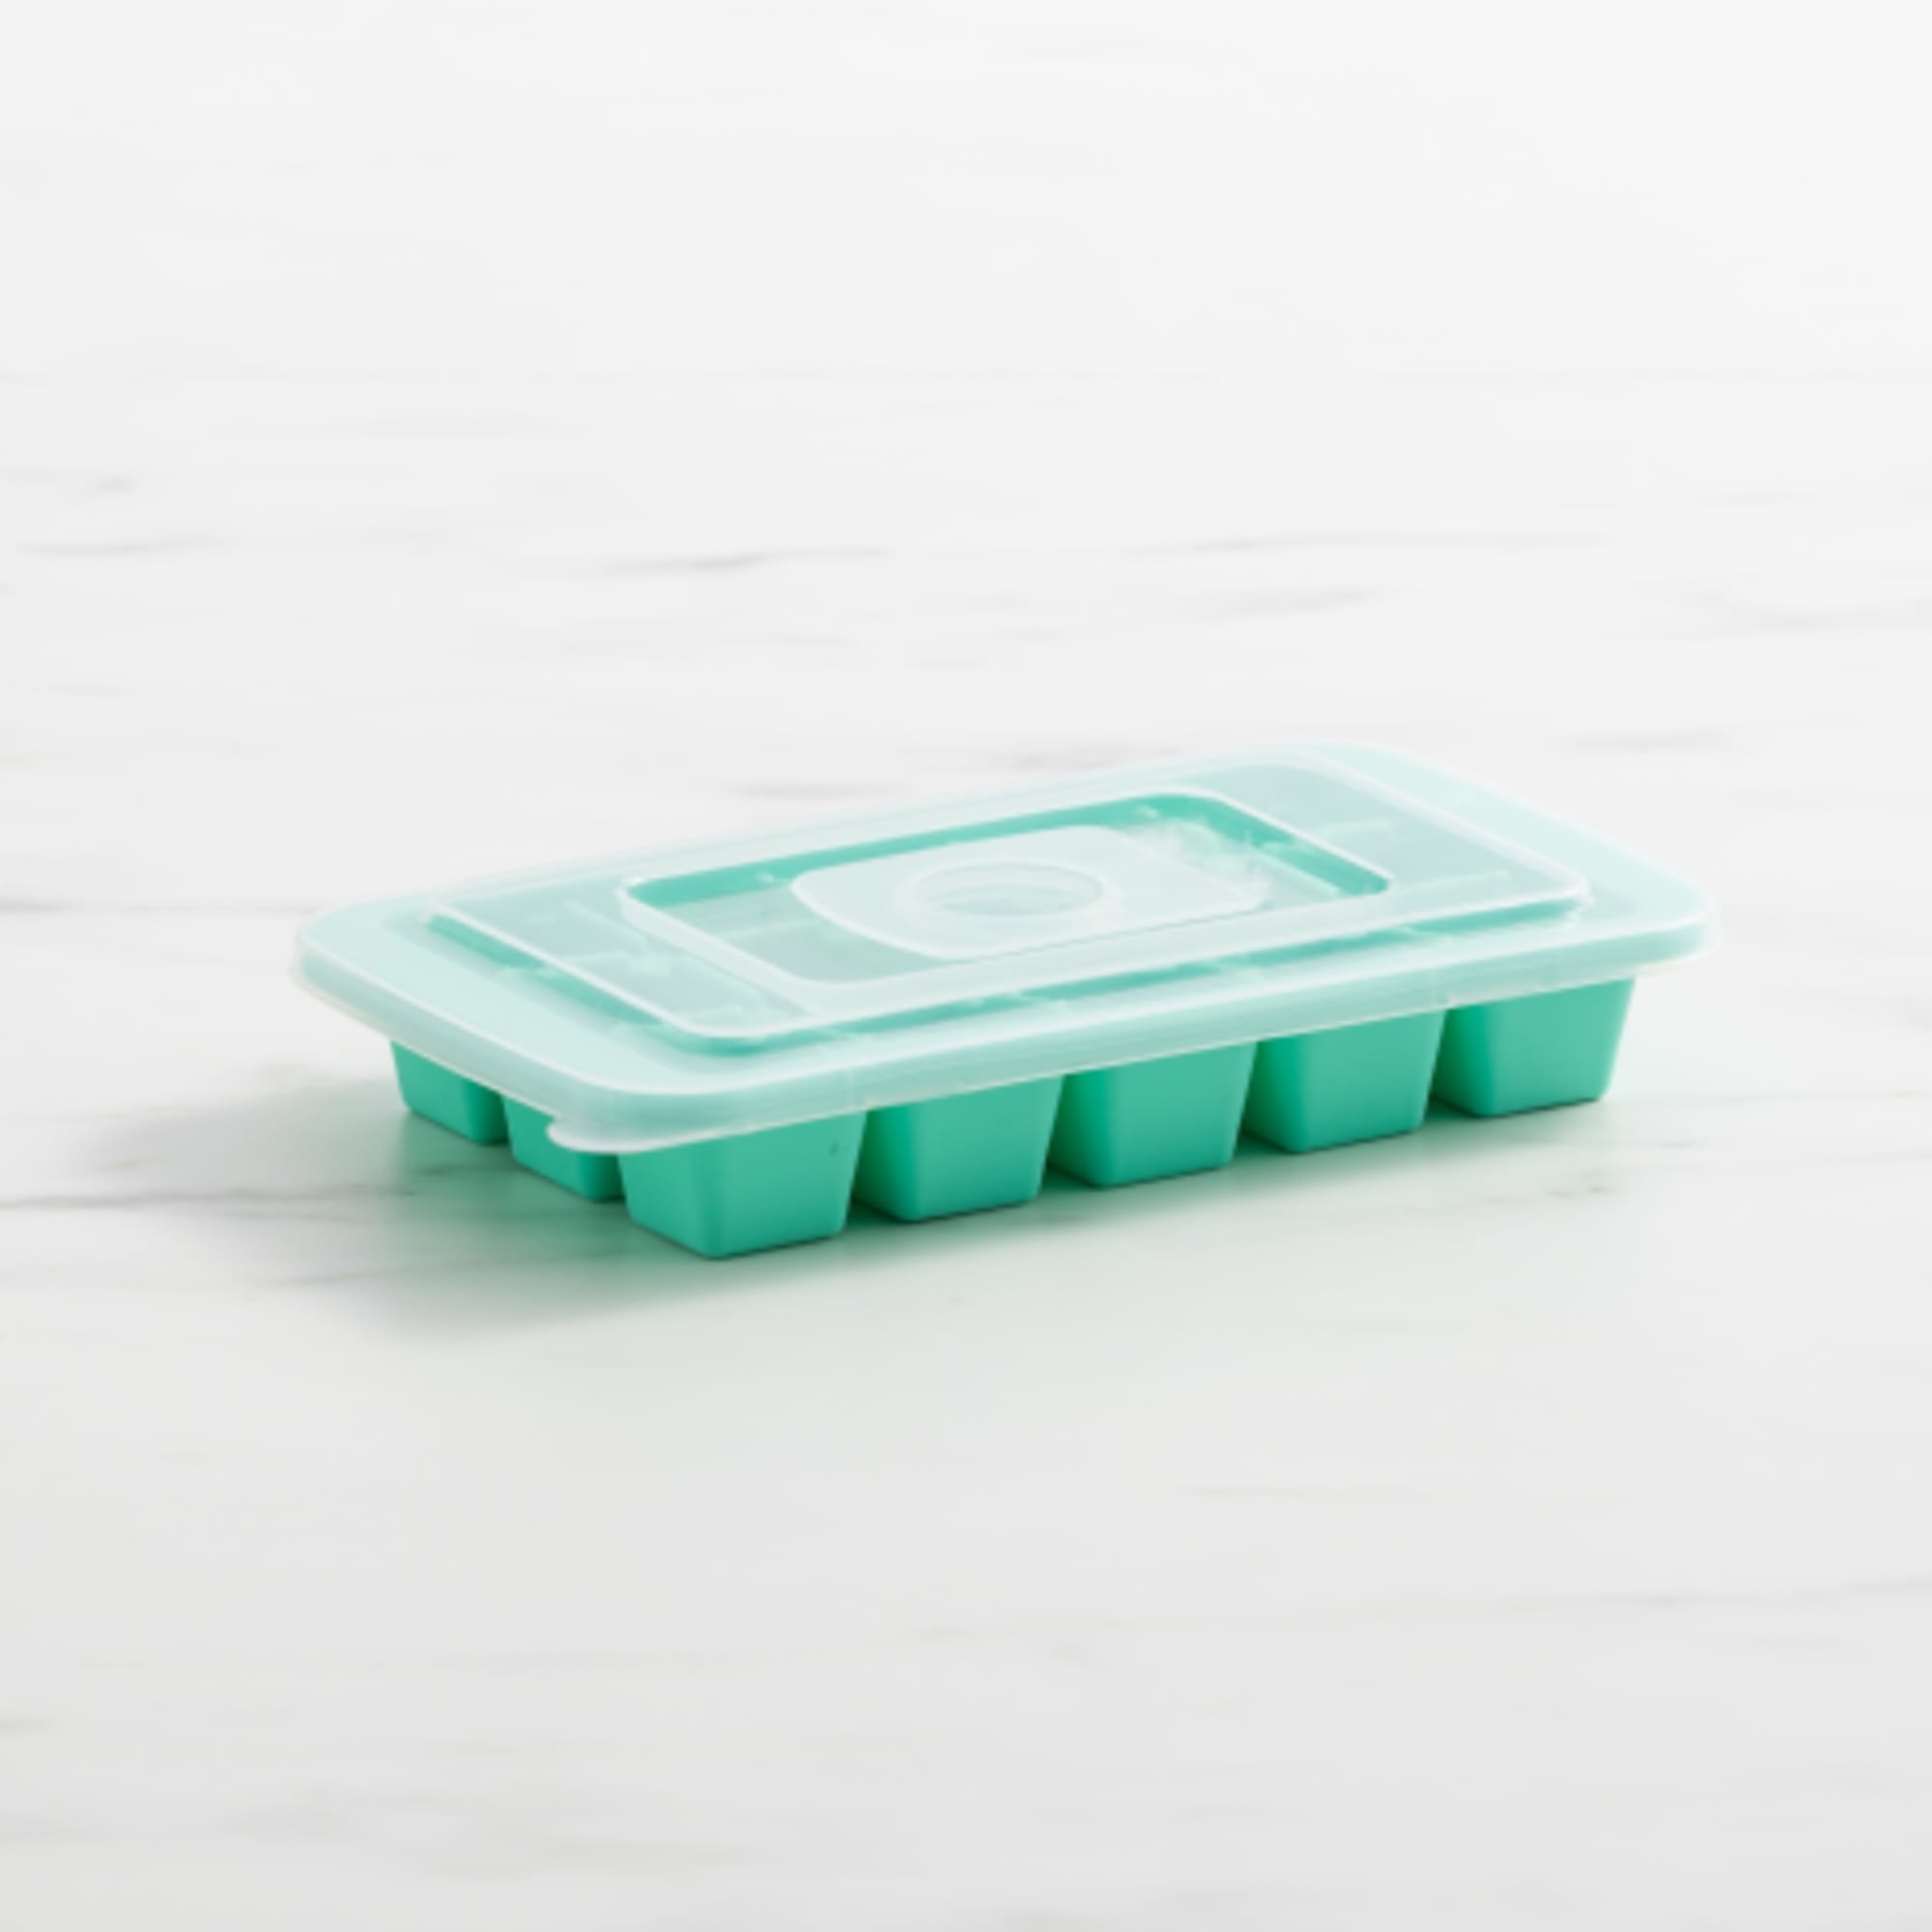 Silicone Ice Mold Cube Trays Mould Maker Cream Making Reusable Container  Lids Ice Chips Pressed Home